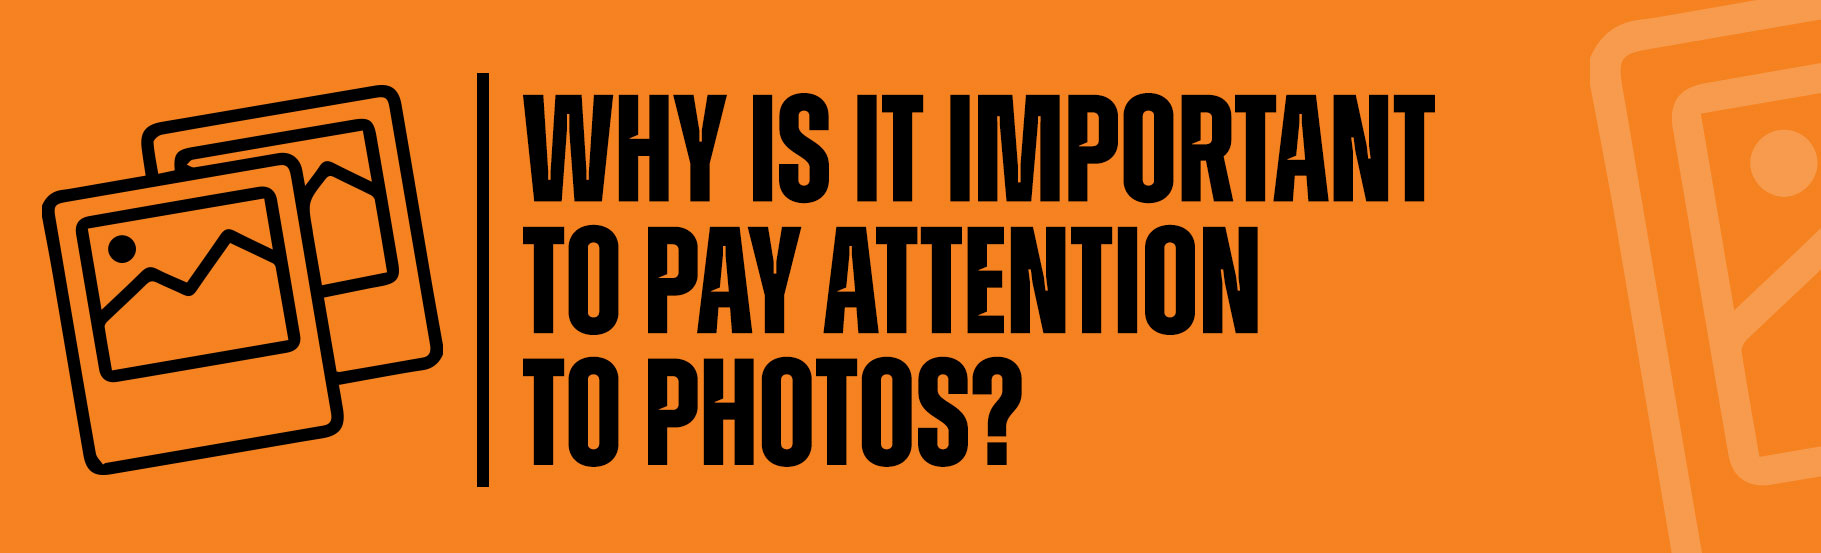 Why is it important to pay attention to photos?